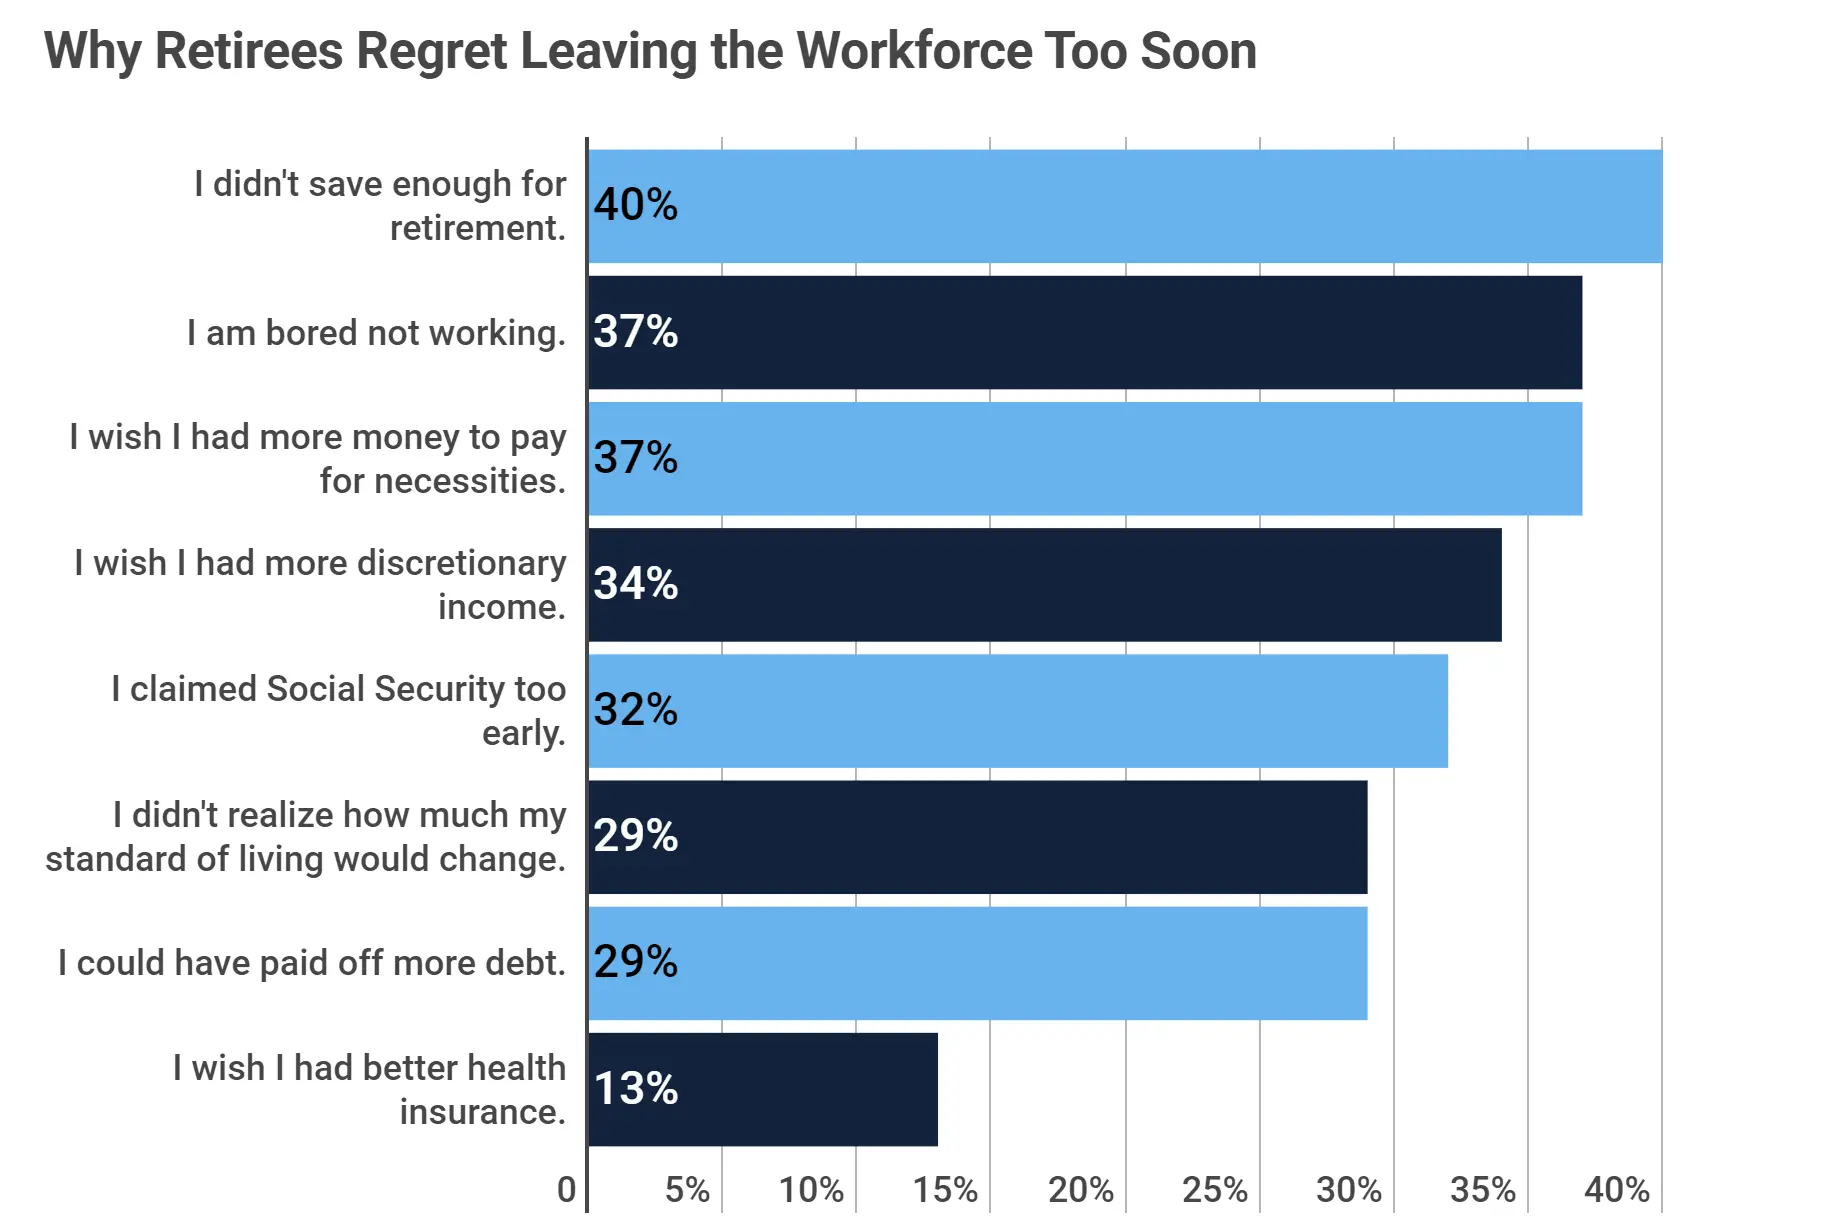 Why Retirees Regret Leaving the Workforce Too Soon, data sourced from Clever survey infographic